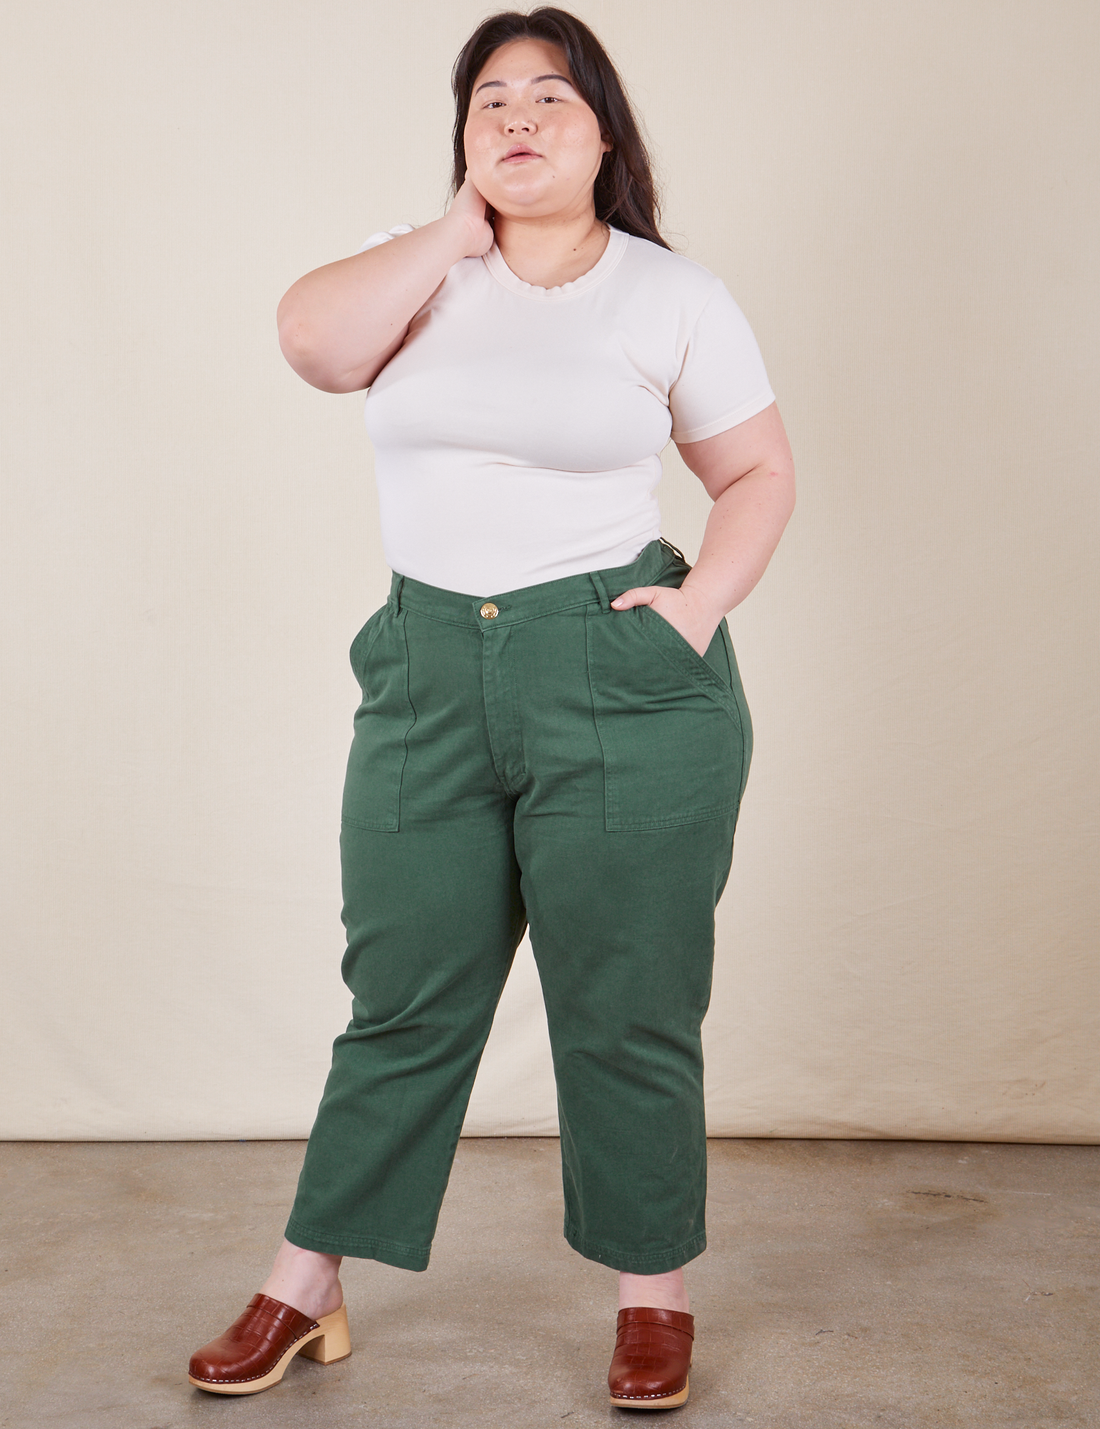 Ashley is 5'7" and wearing Petite 1XL Work Pants in Dark Emerald Green paired with vintage off-white Baby Tee